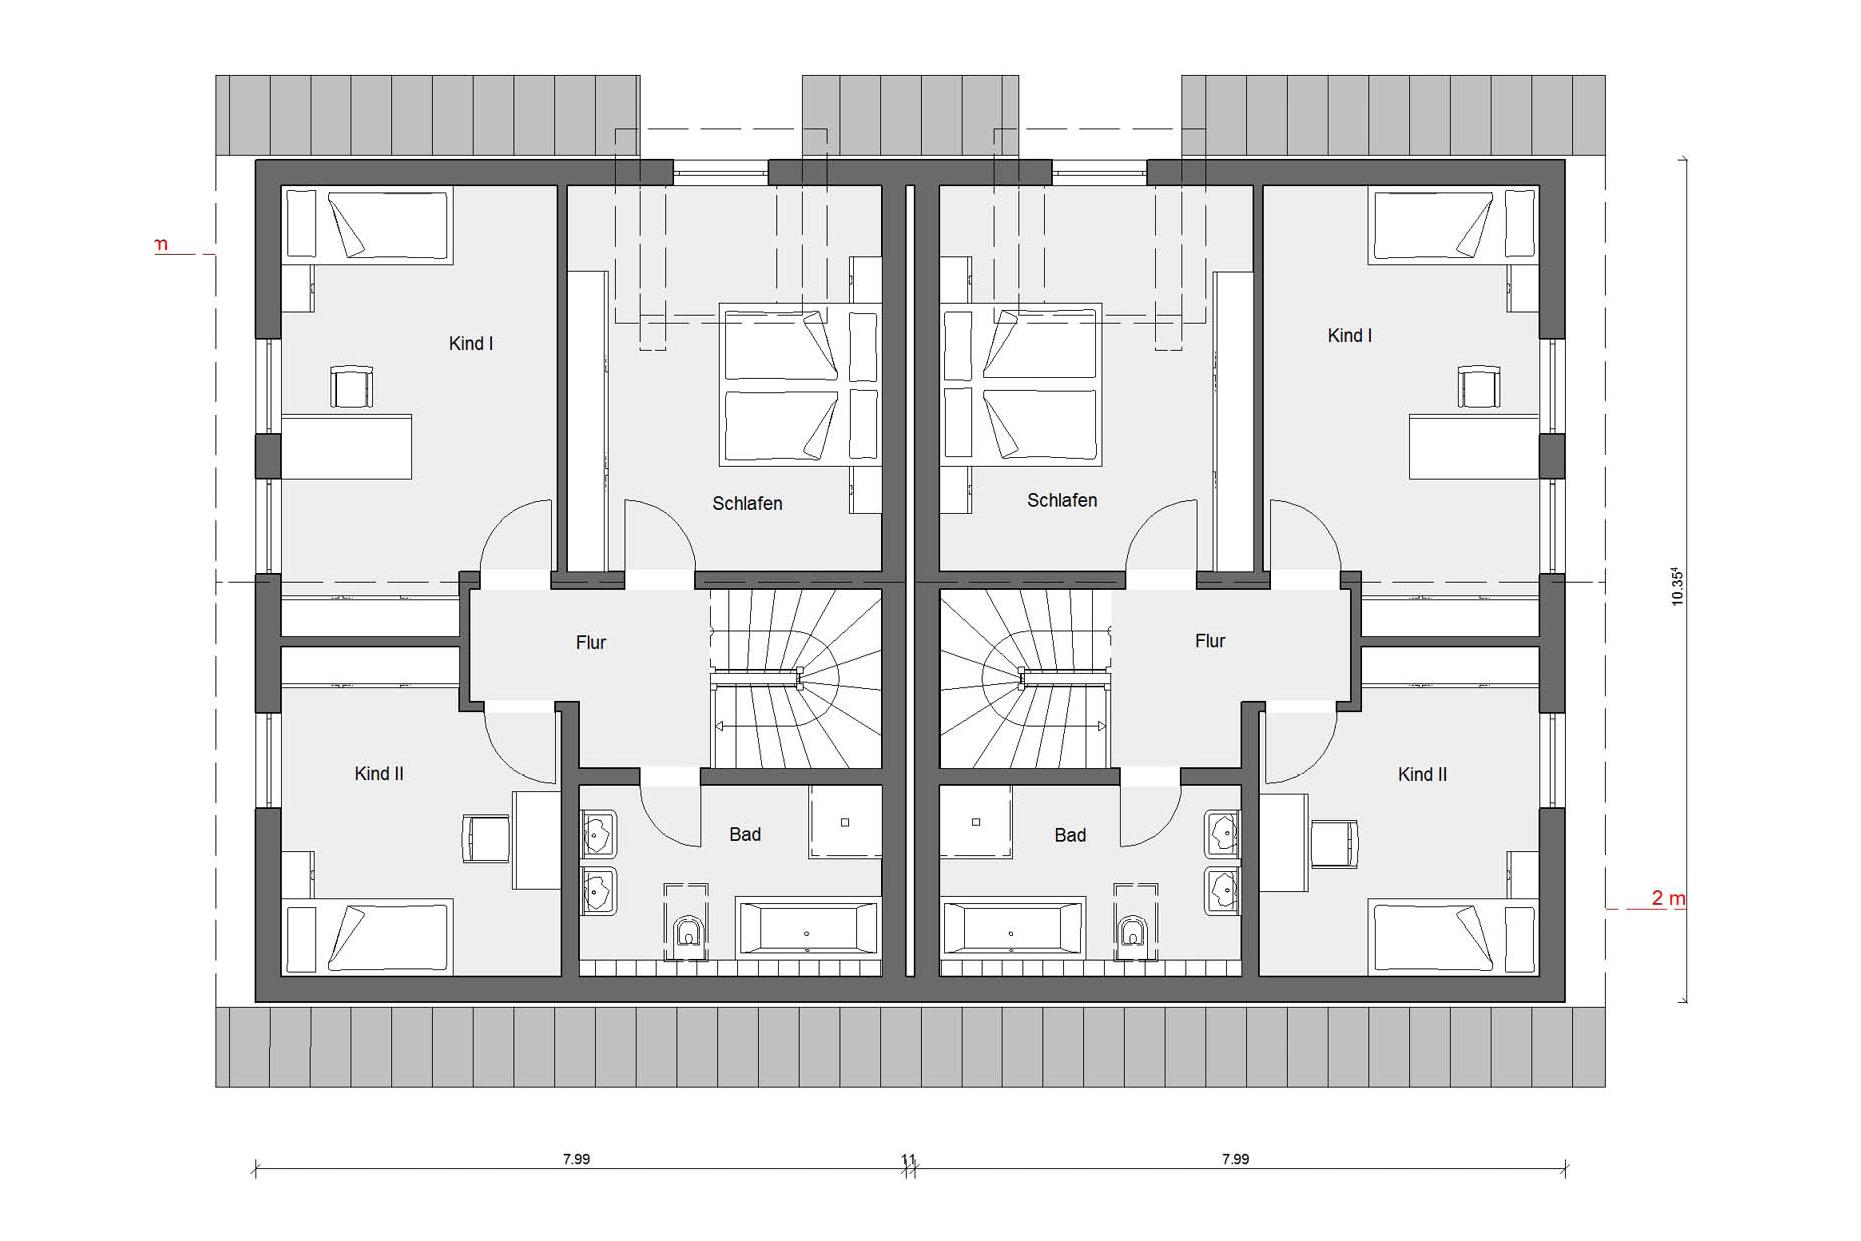 Attic floor plan semi-detached house with covered patio